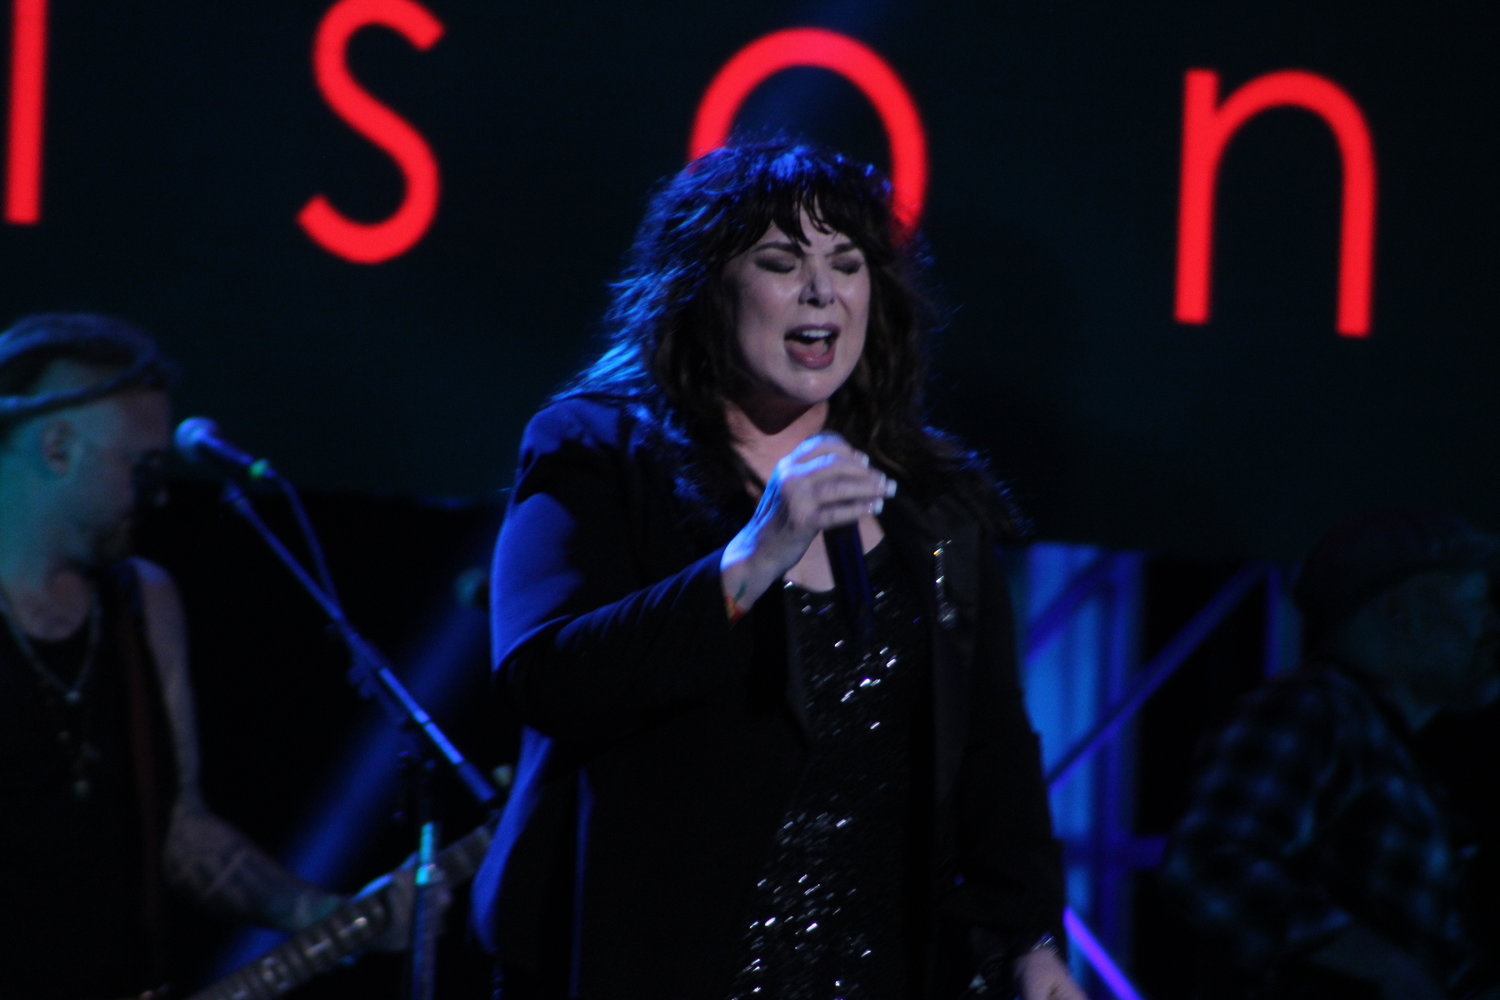 Ann Wilson, the lead singer and songwriter of Heart, belted out “Barracuda” at Northwell Health at Jones Beach Theater in Wantagh on Saturday.